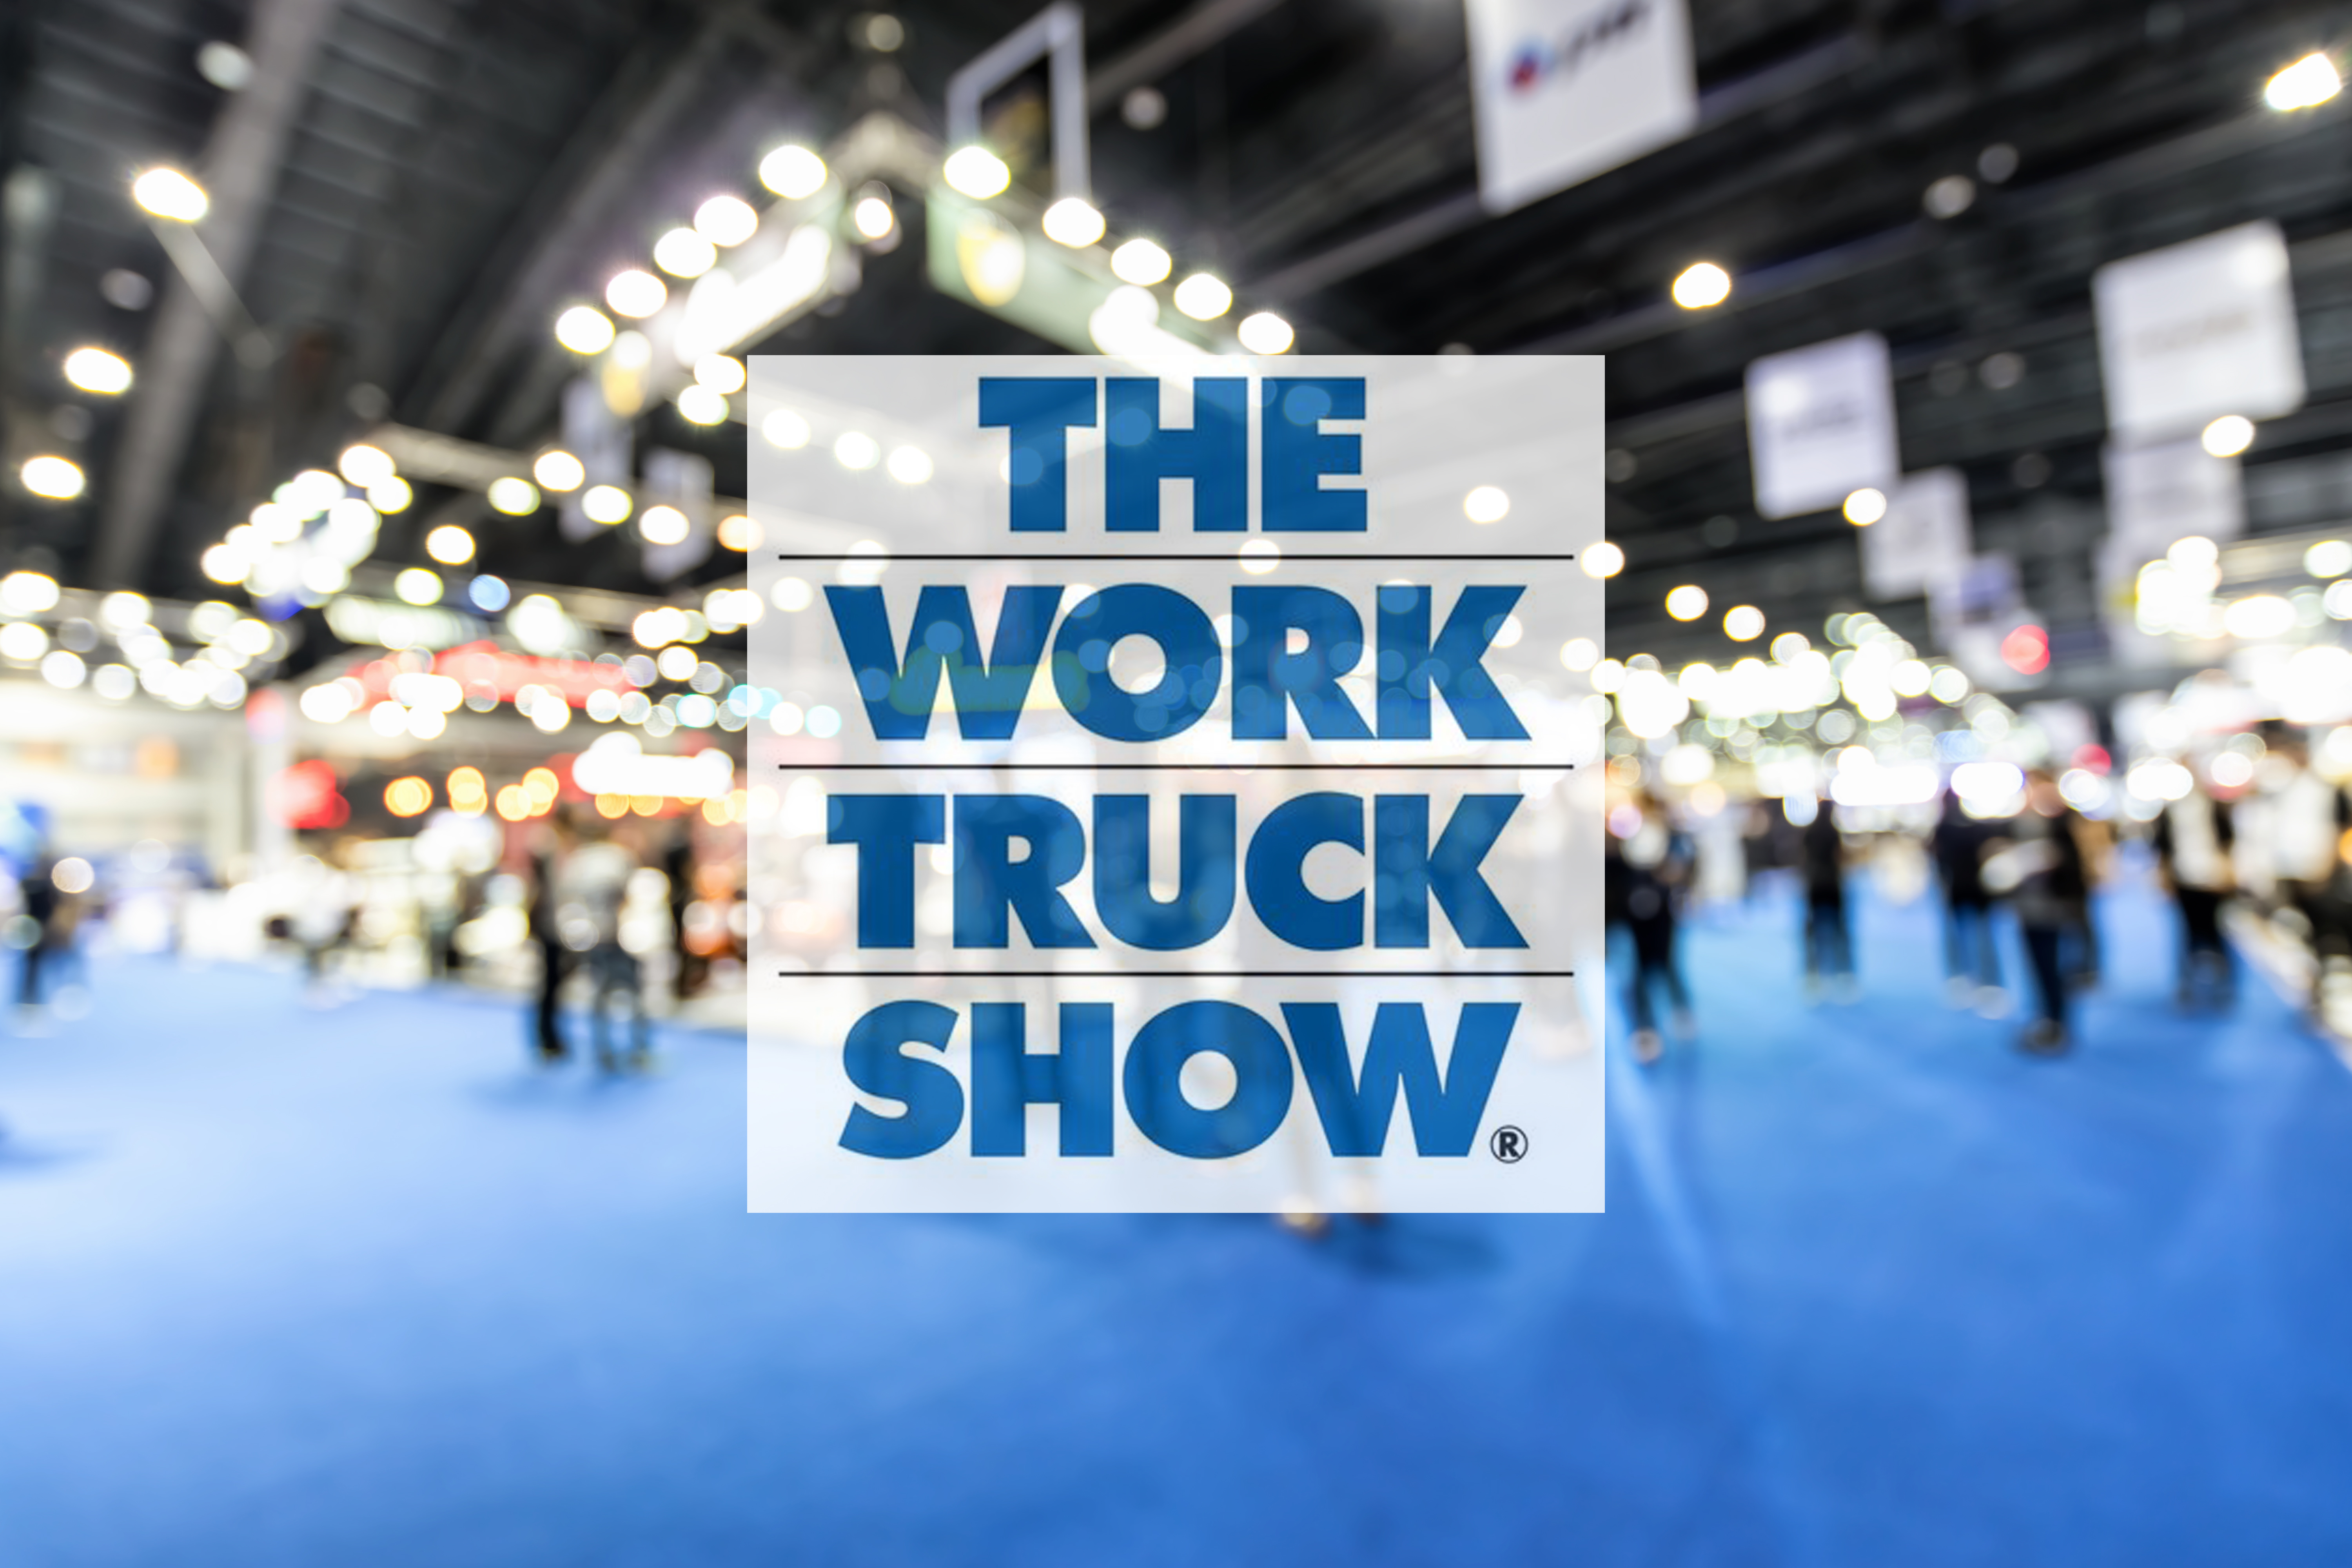 The Work Truck Show